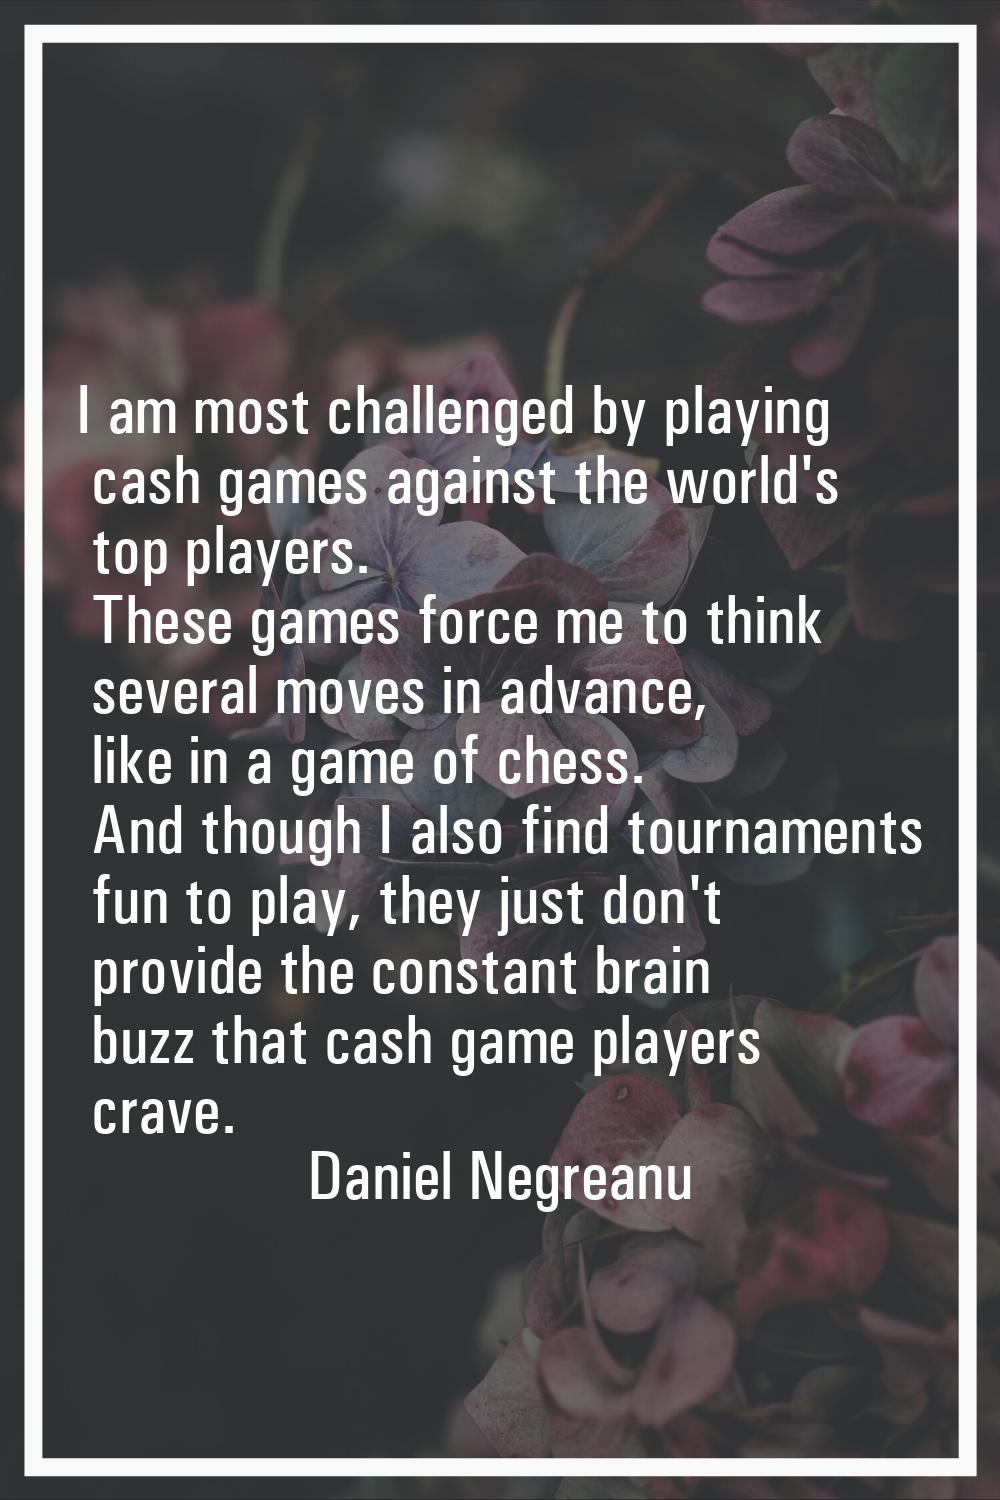 I am most challenged by playing cash games against the world's top players. These games force me to